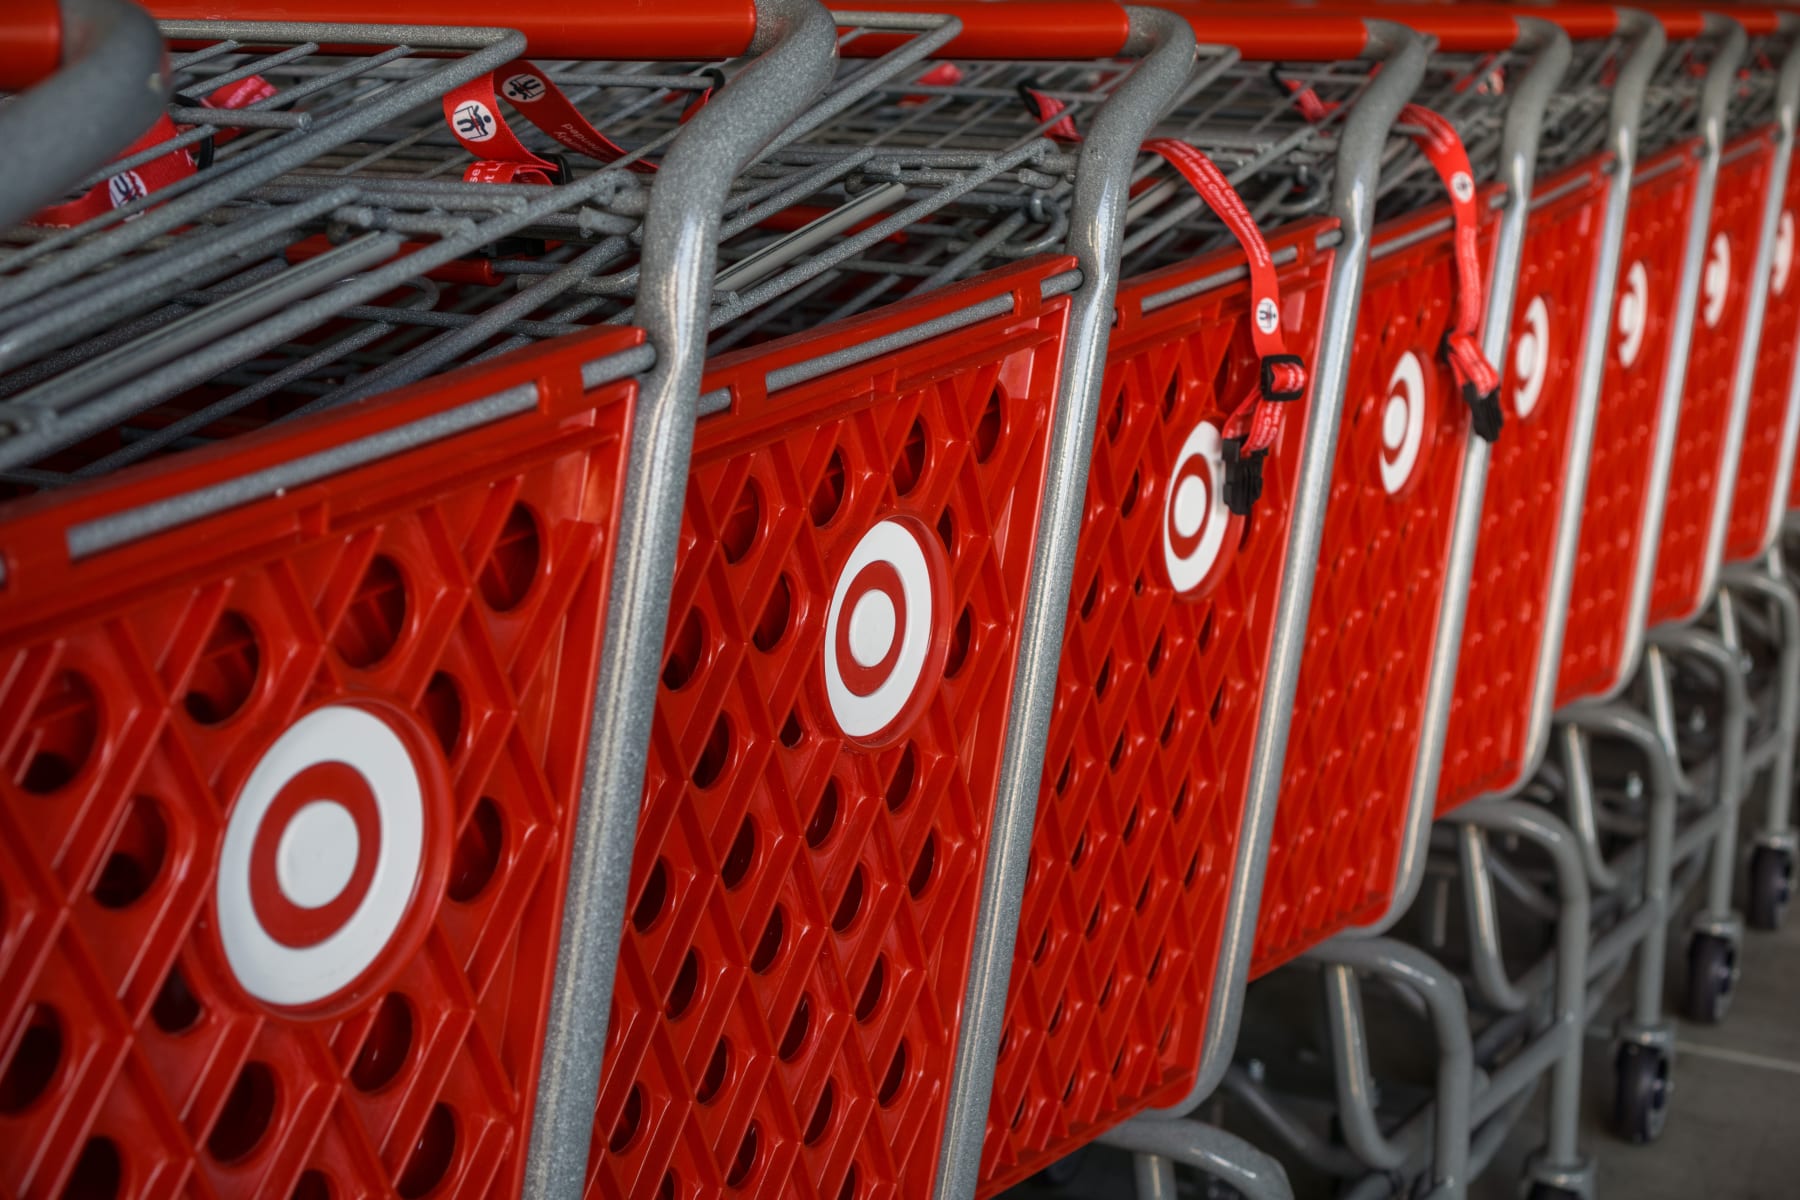 A row of Target store carts are shown.